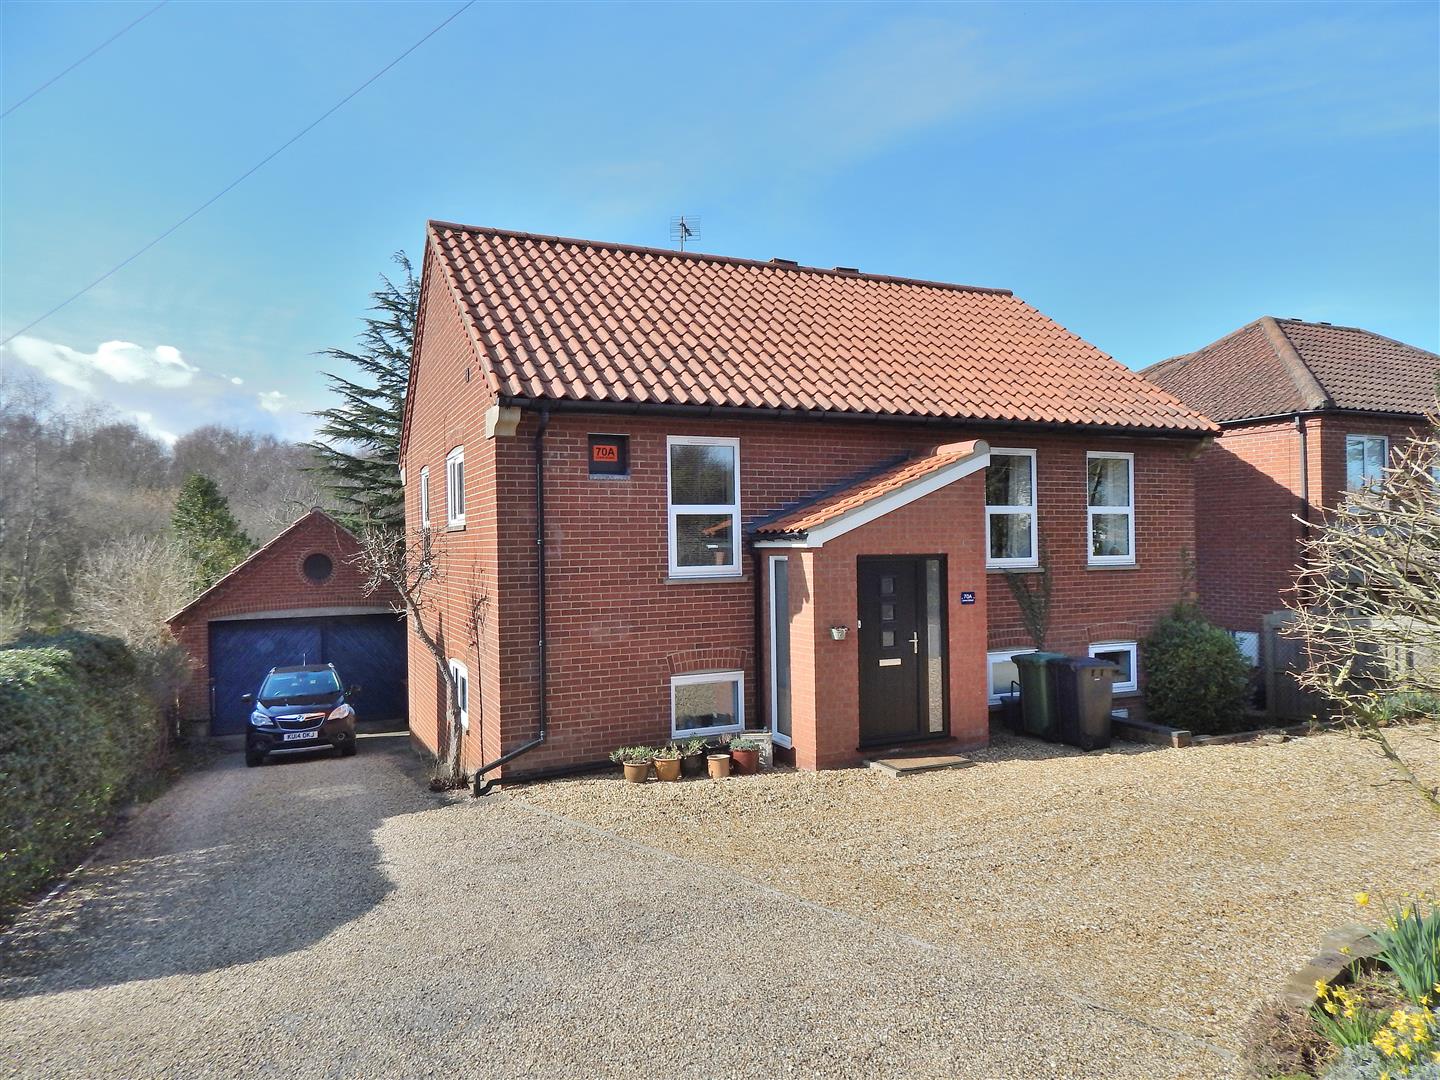 4 bed detached house for sale in Lynn Road, King's Lynn - Property Image 1